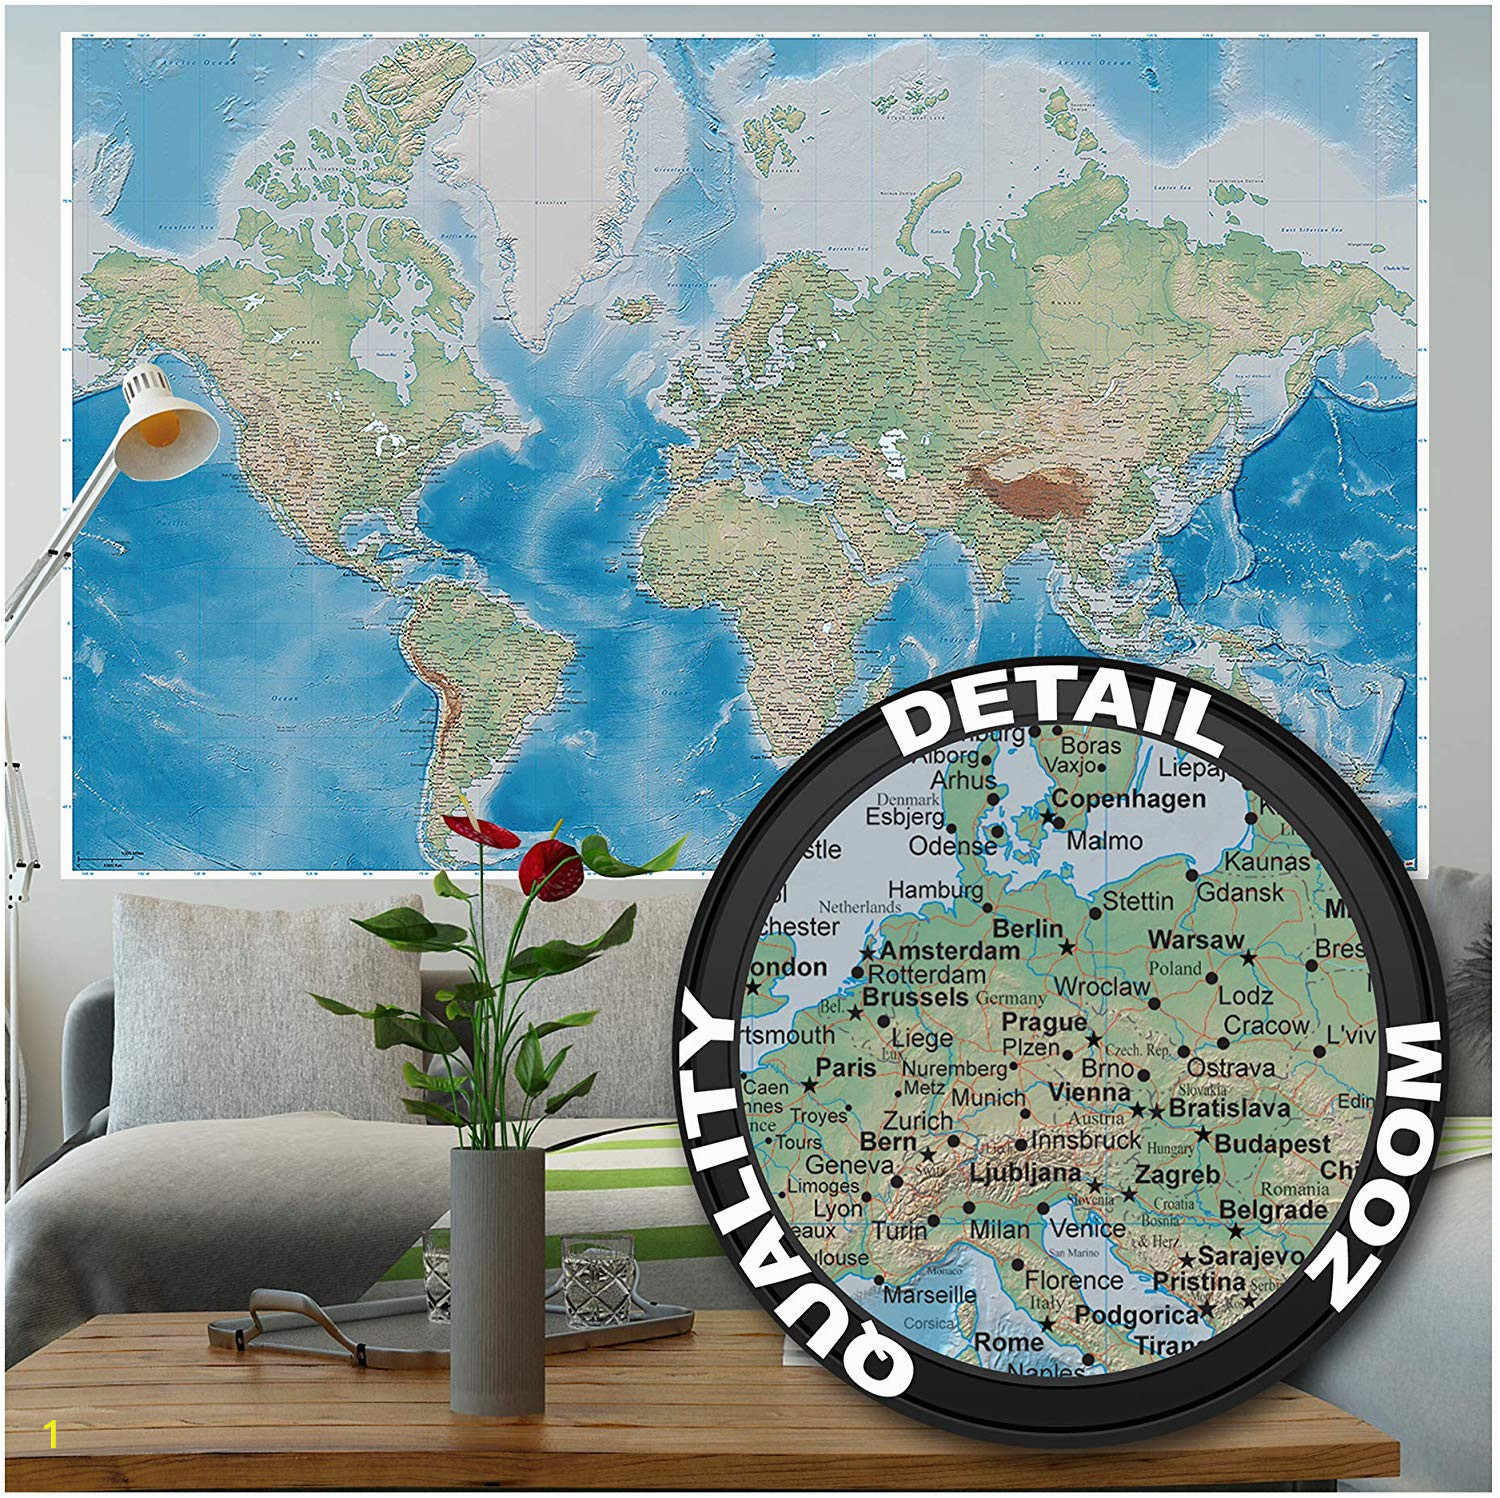 Wall Hanging World Map Mural Mural – World Map – Wall Picture Decoration Miller Projection In Plastically Relief Design Earth atlas Globe Wallposter Poster Decor 82 7 X 55